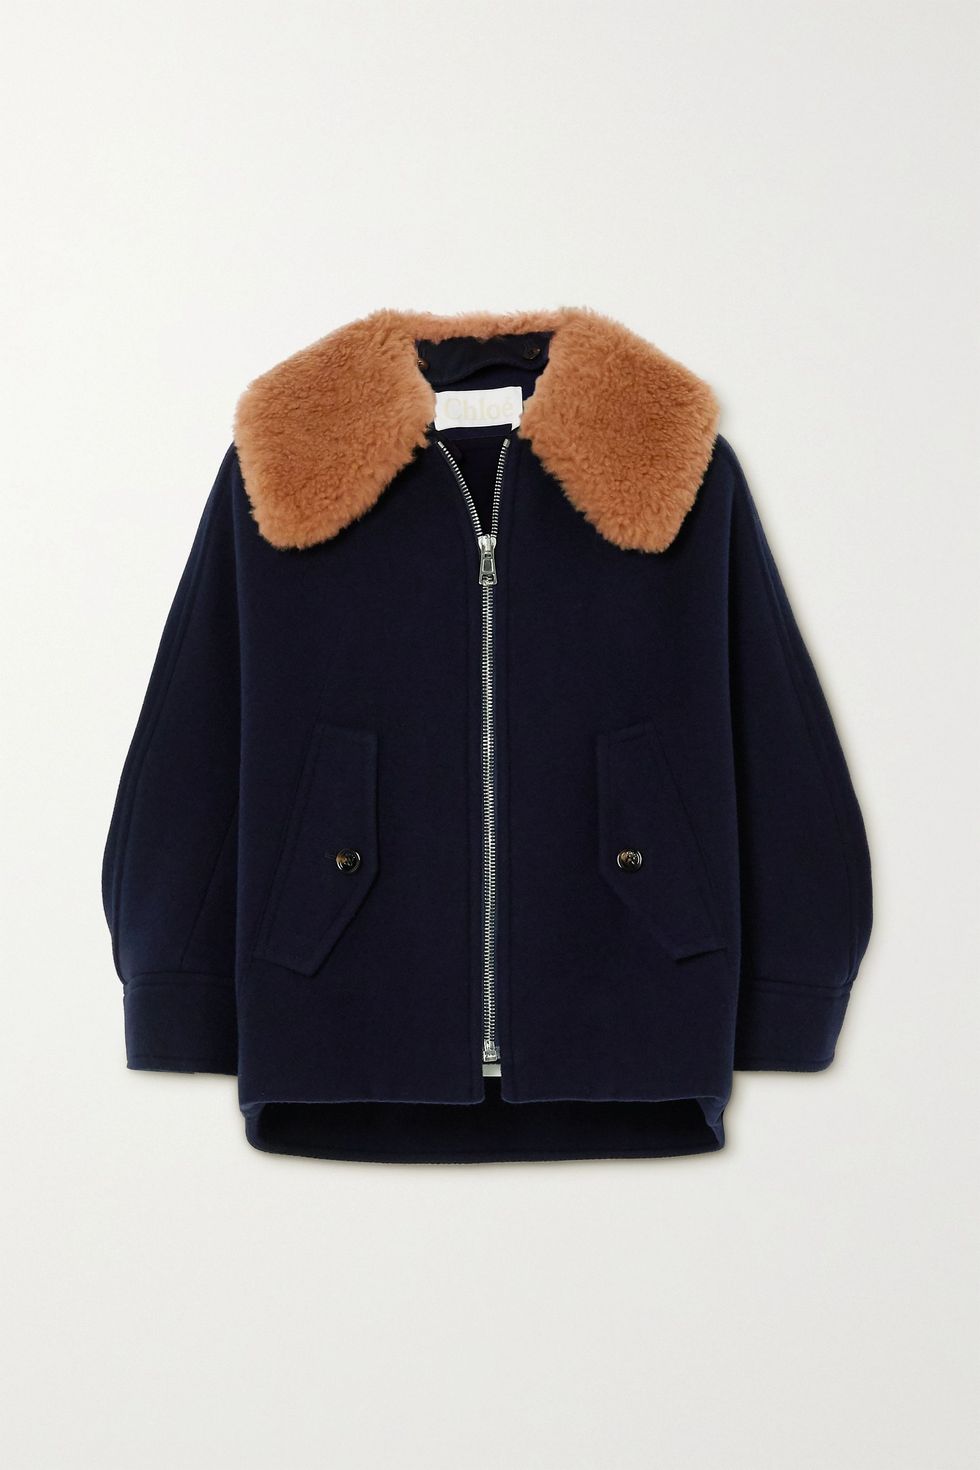 40 Winter Jackets For Women, To Keep You Feeling Cosy